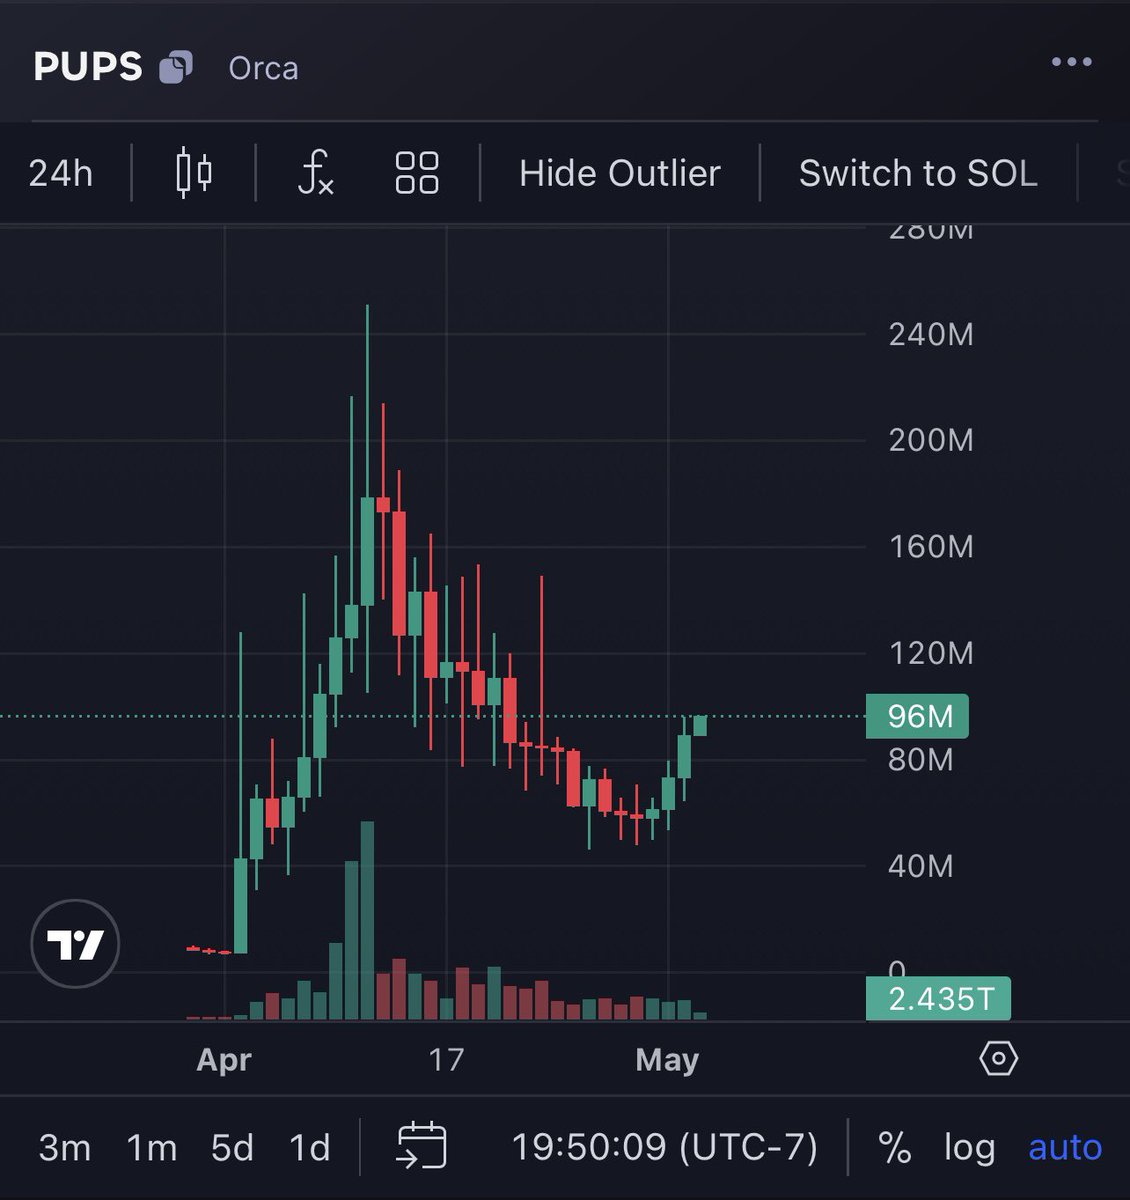 $PUPS about to form the New Balance logo chart! That’s my TA